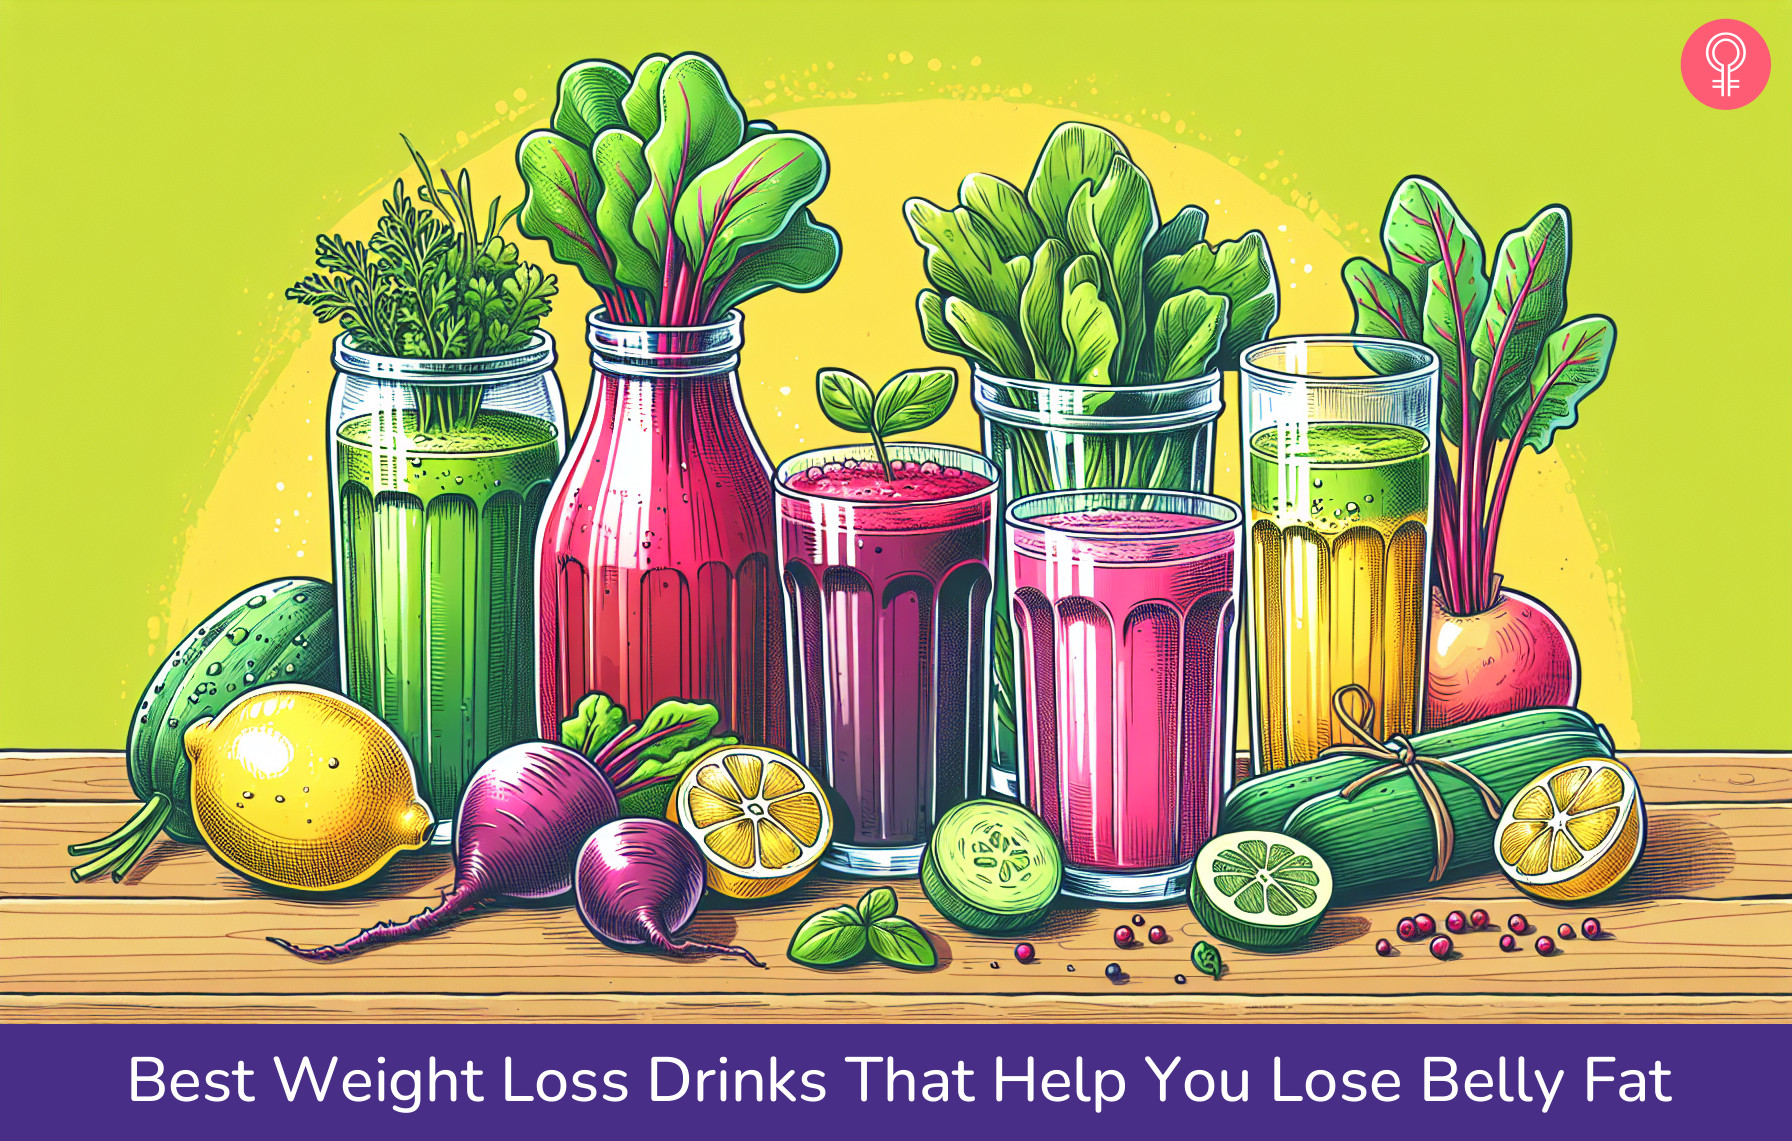 15 Best Weight Loss Drinks That Help You Lose Belly Fat